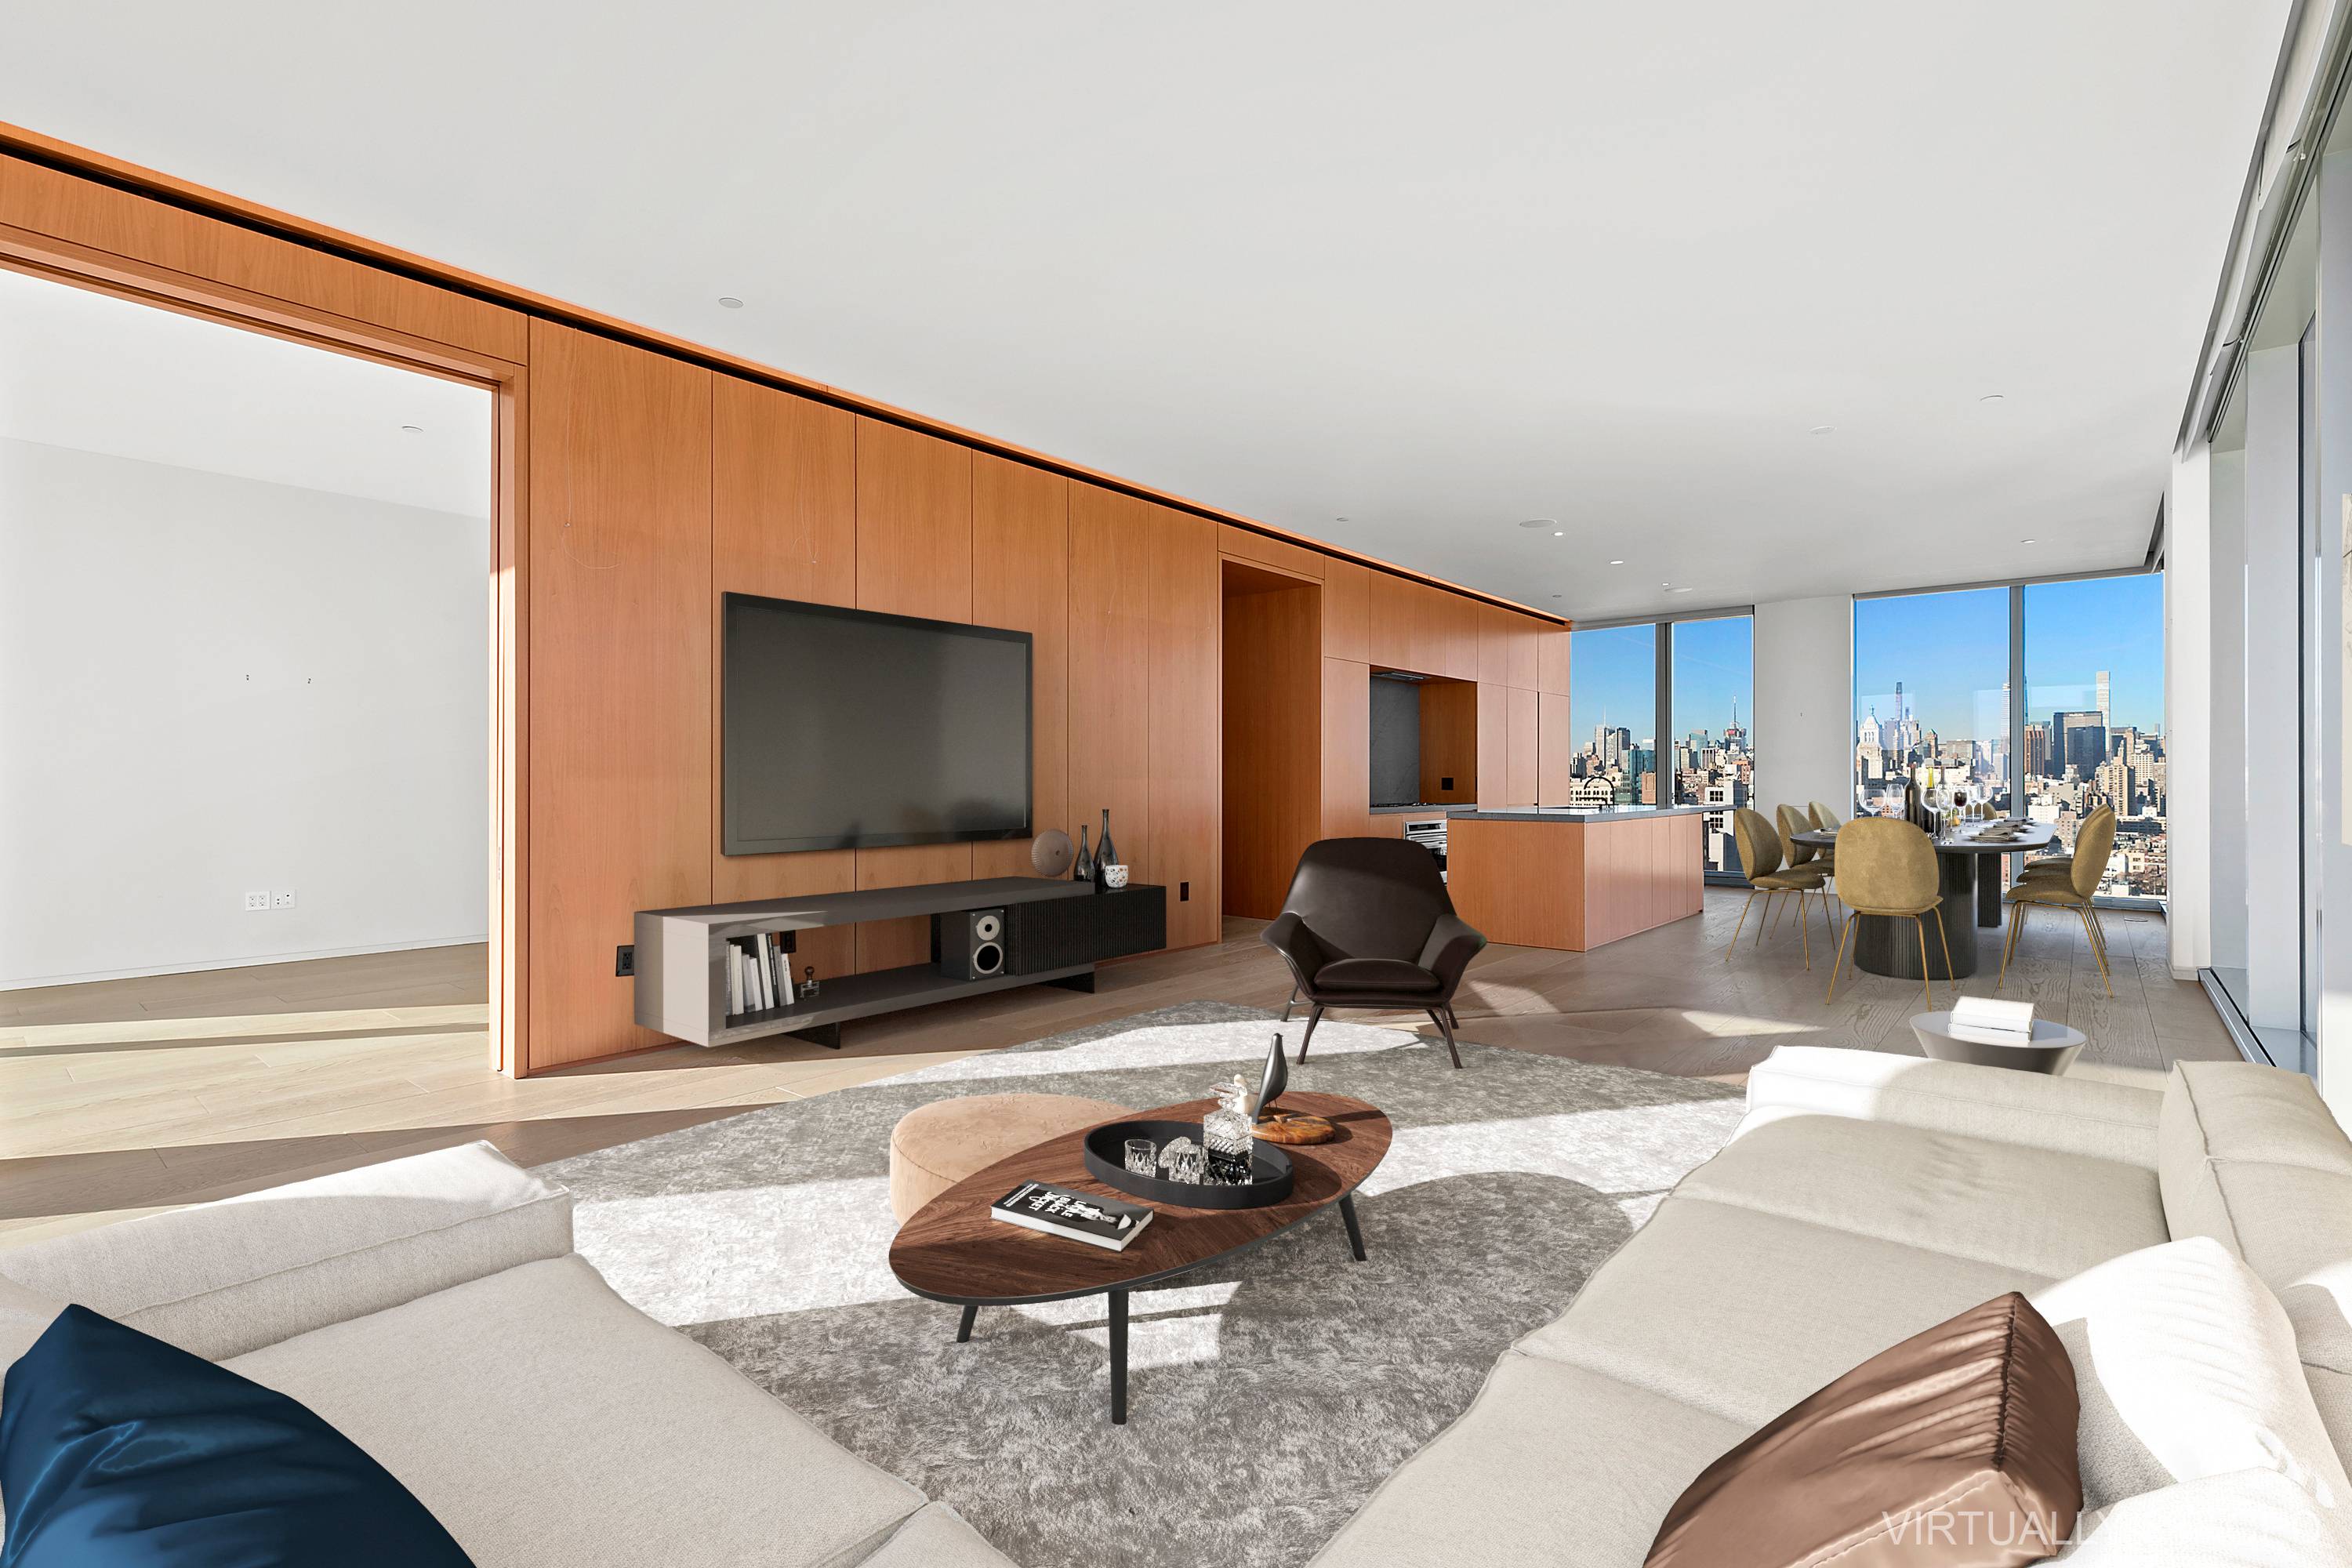 INCREDIBLE ONE OF A KIND FULL SERVICE DOWNTOWN CONDOMINIUM RESIDENCE DEVELOPED BY IAN SCHRAGER and designed by Pritzker Price award winning architects Herzog amp ; de Meuron, offers the only ...